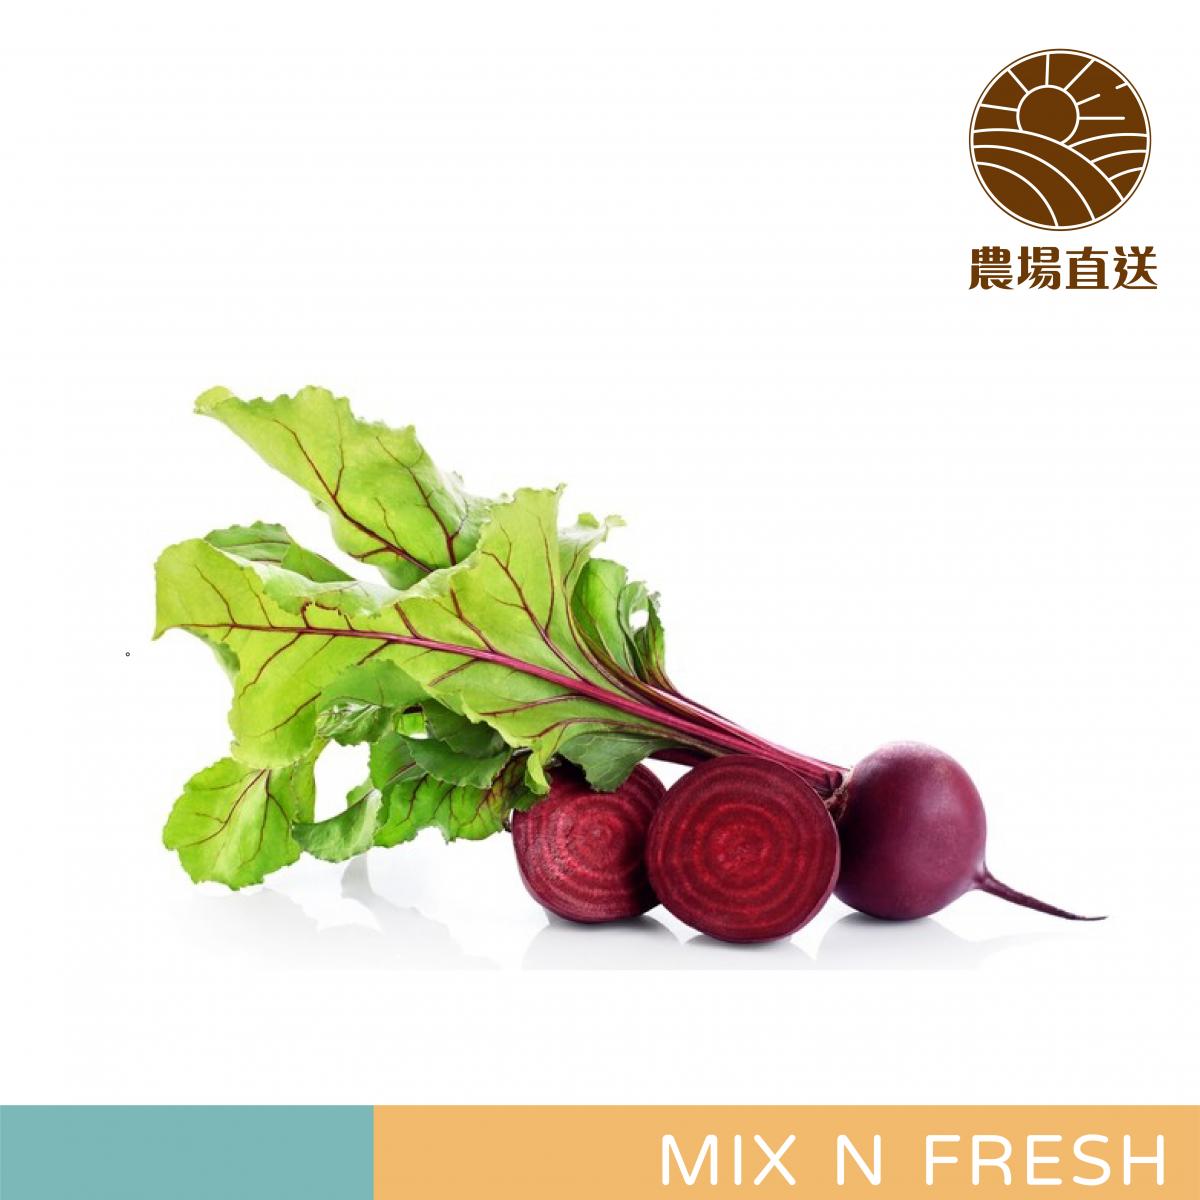 Beetroot with leave (Around 700-800g) 有葉紅菜頭 (約700-800g)